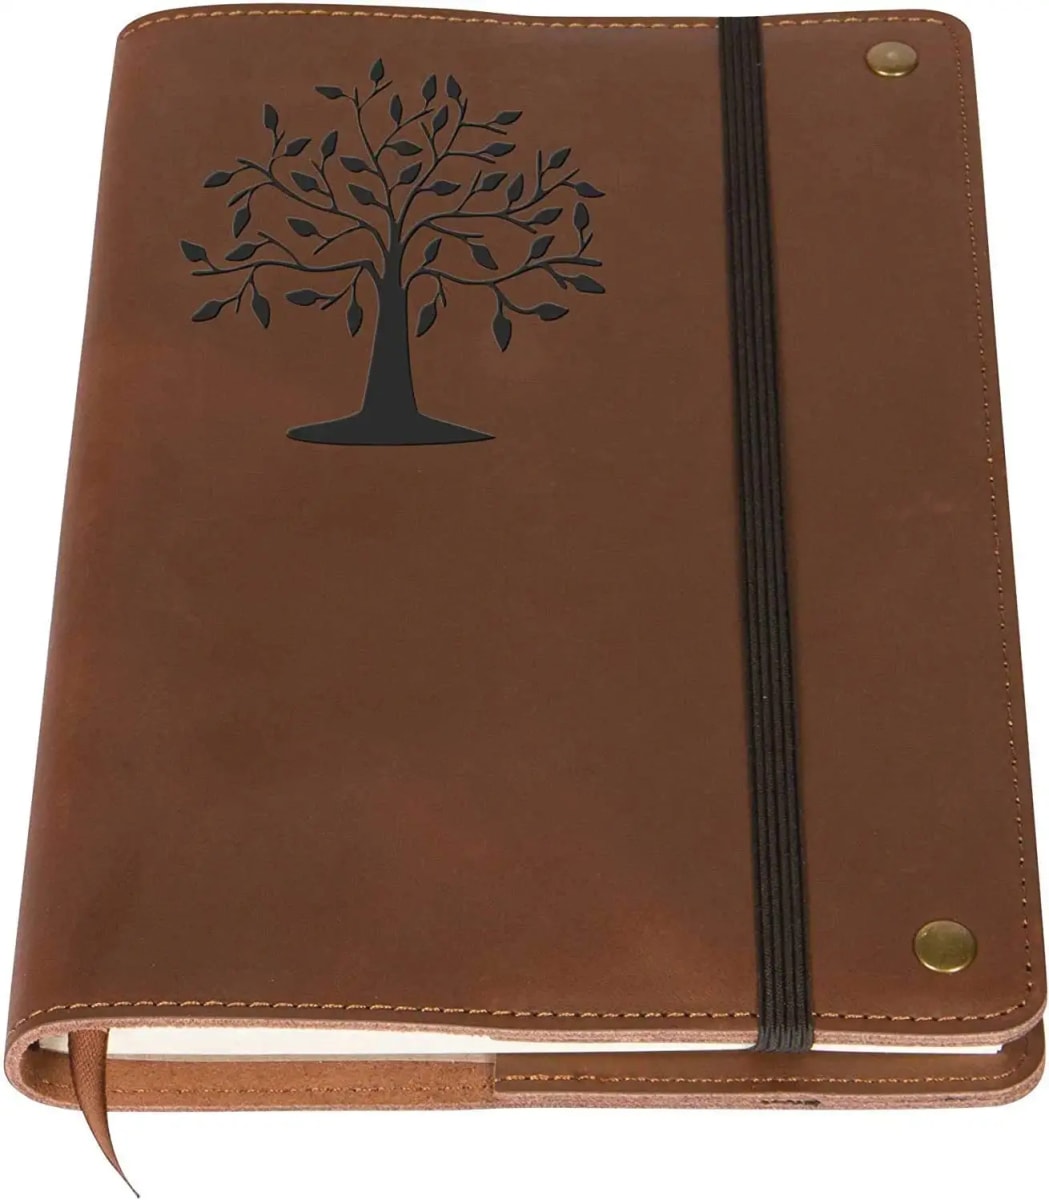 The Tree Of Life - Real Leather Refillable Writing Journal | Elastic Strap | 200 Lined Pages